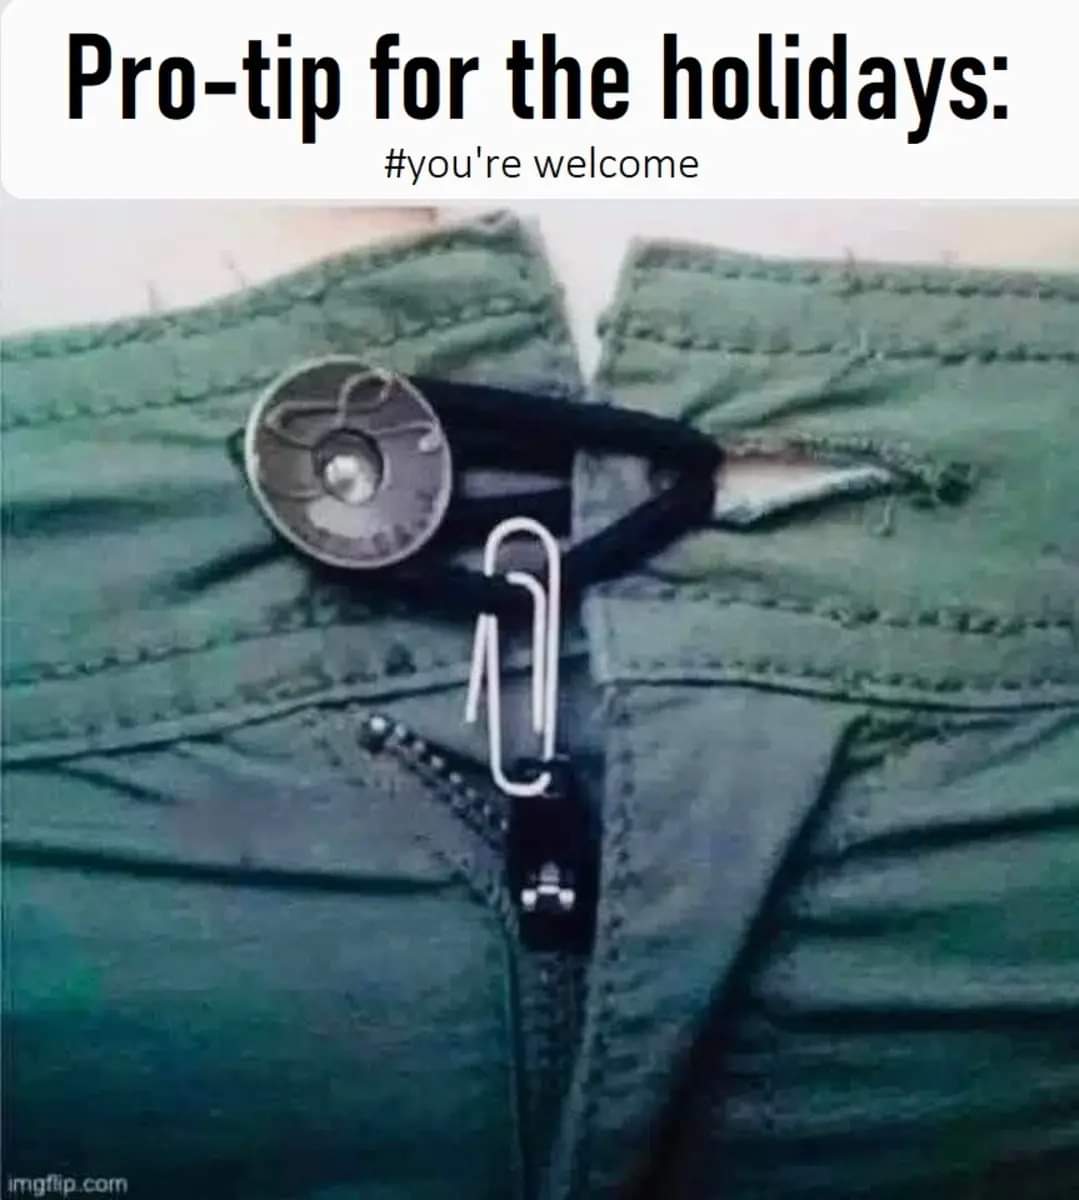 pro-tip_for_the_holidays.jpg